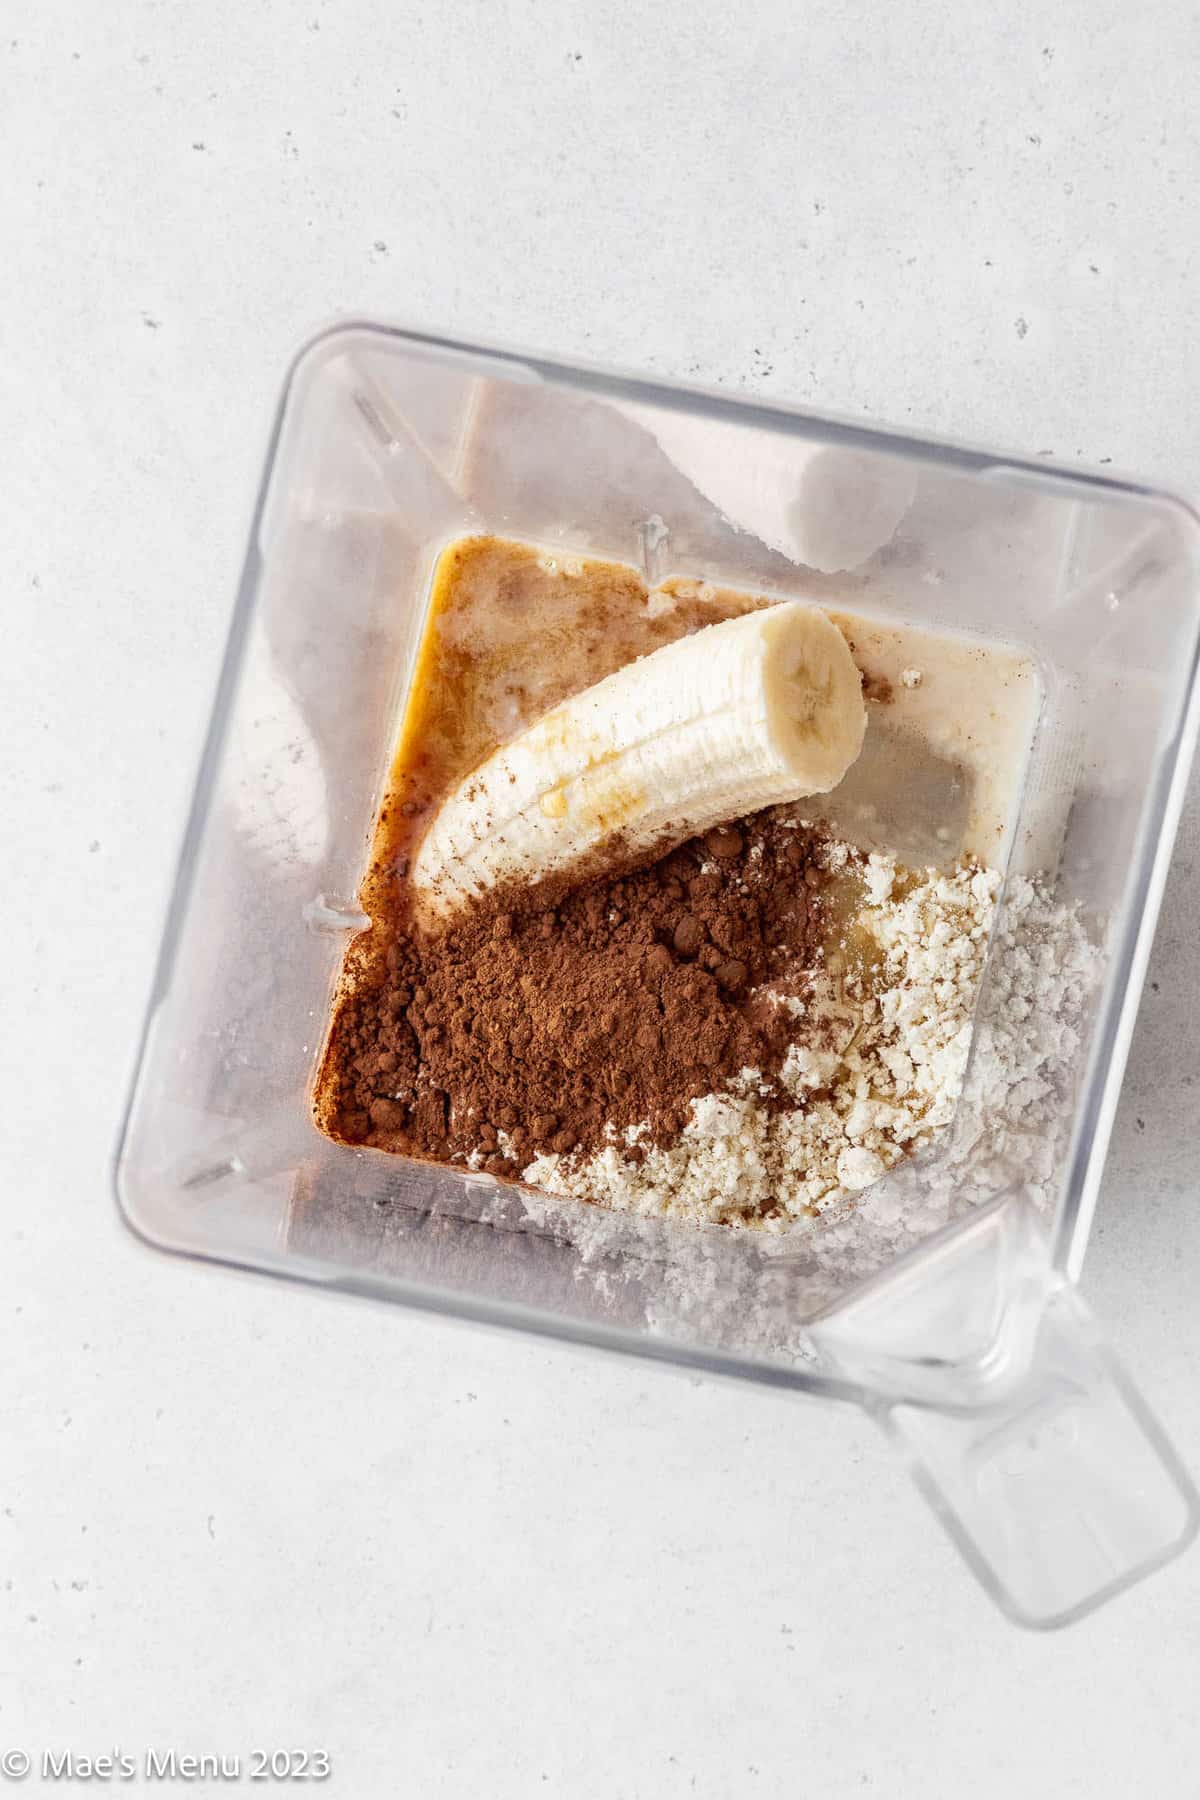 All of the ingredients for a chocolate banana protein smoothie in a blender.